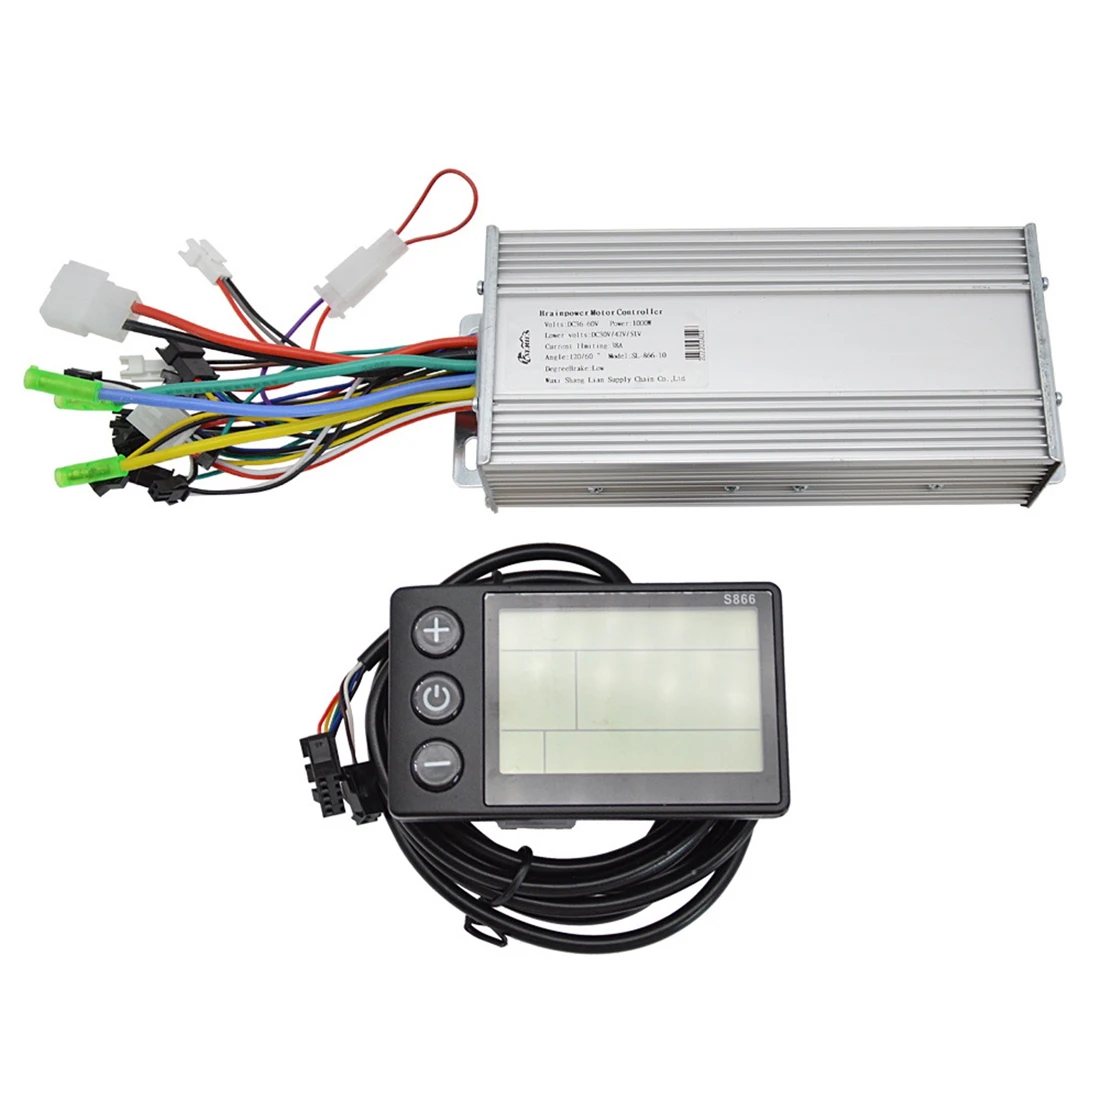 

Controller 1000W Work with S866 Display Controller 36V - 60V for Electric Bike Motor 1000W